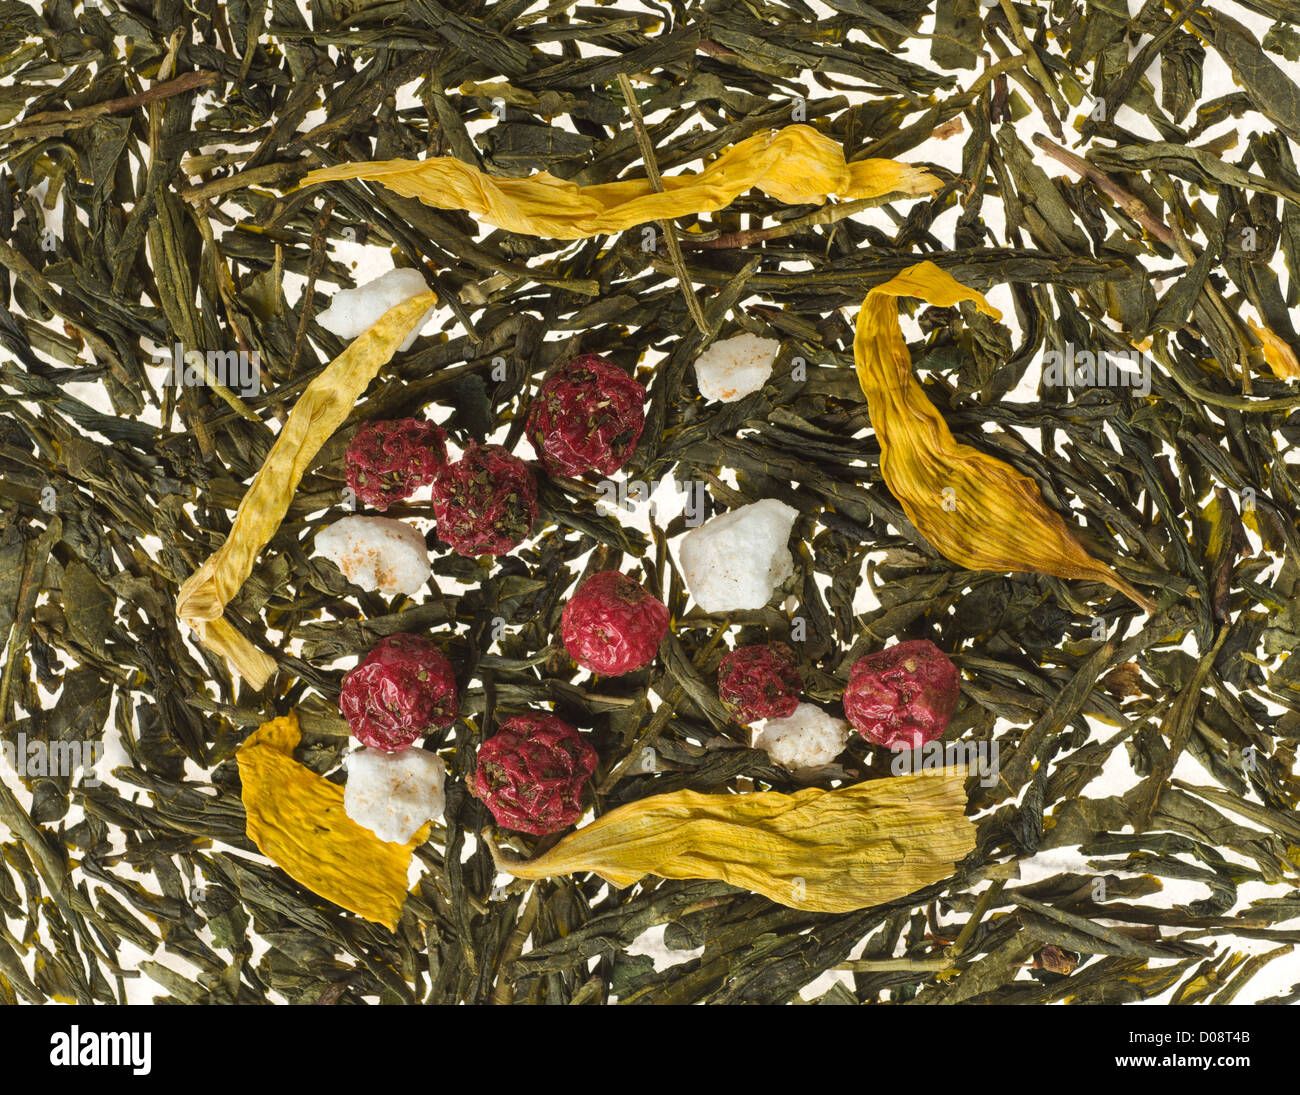 Background image consisting of tea leaves and dry fruits with focus on berries Stock Photo